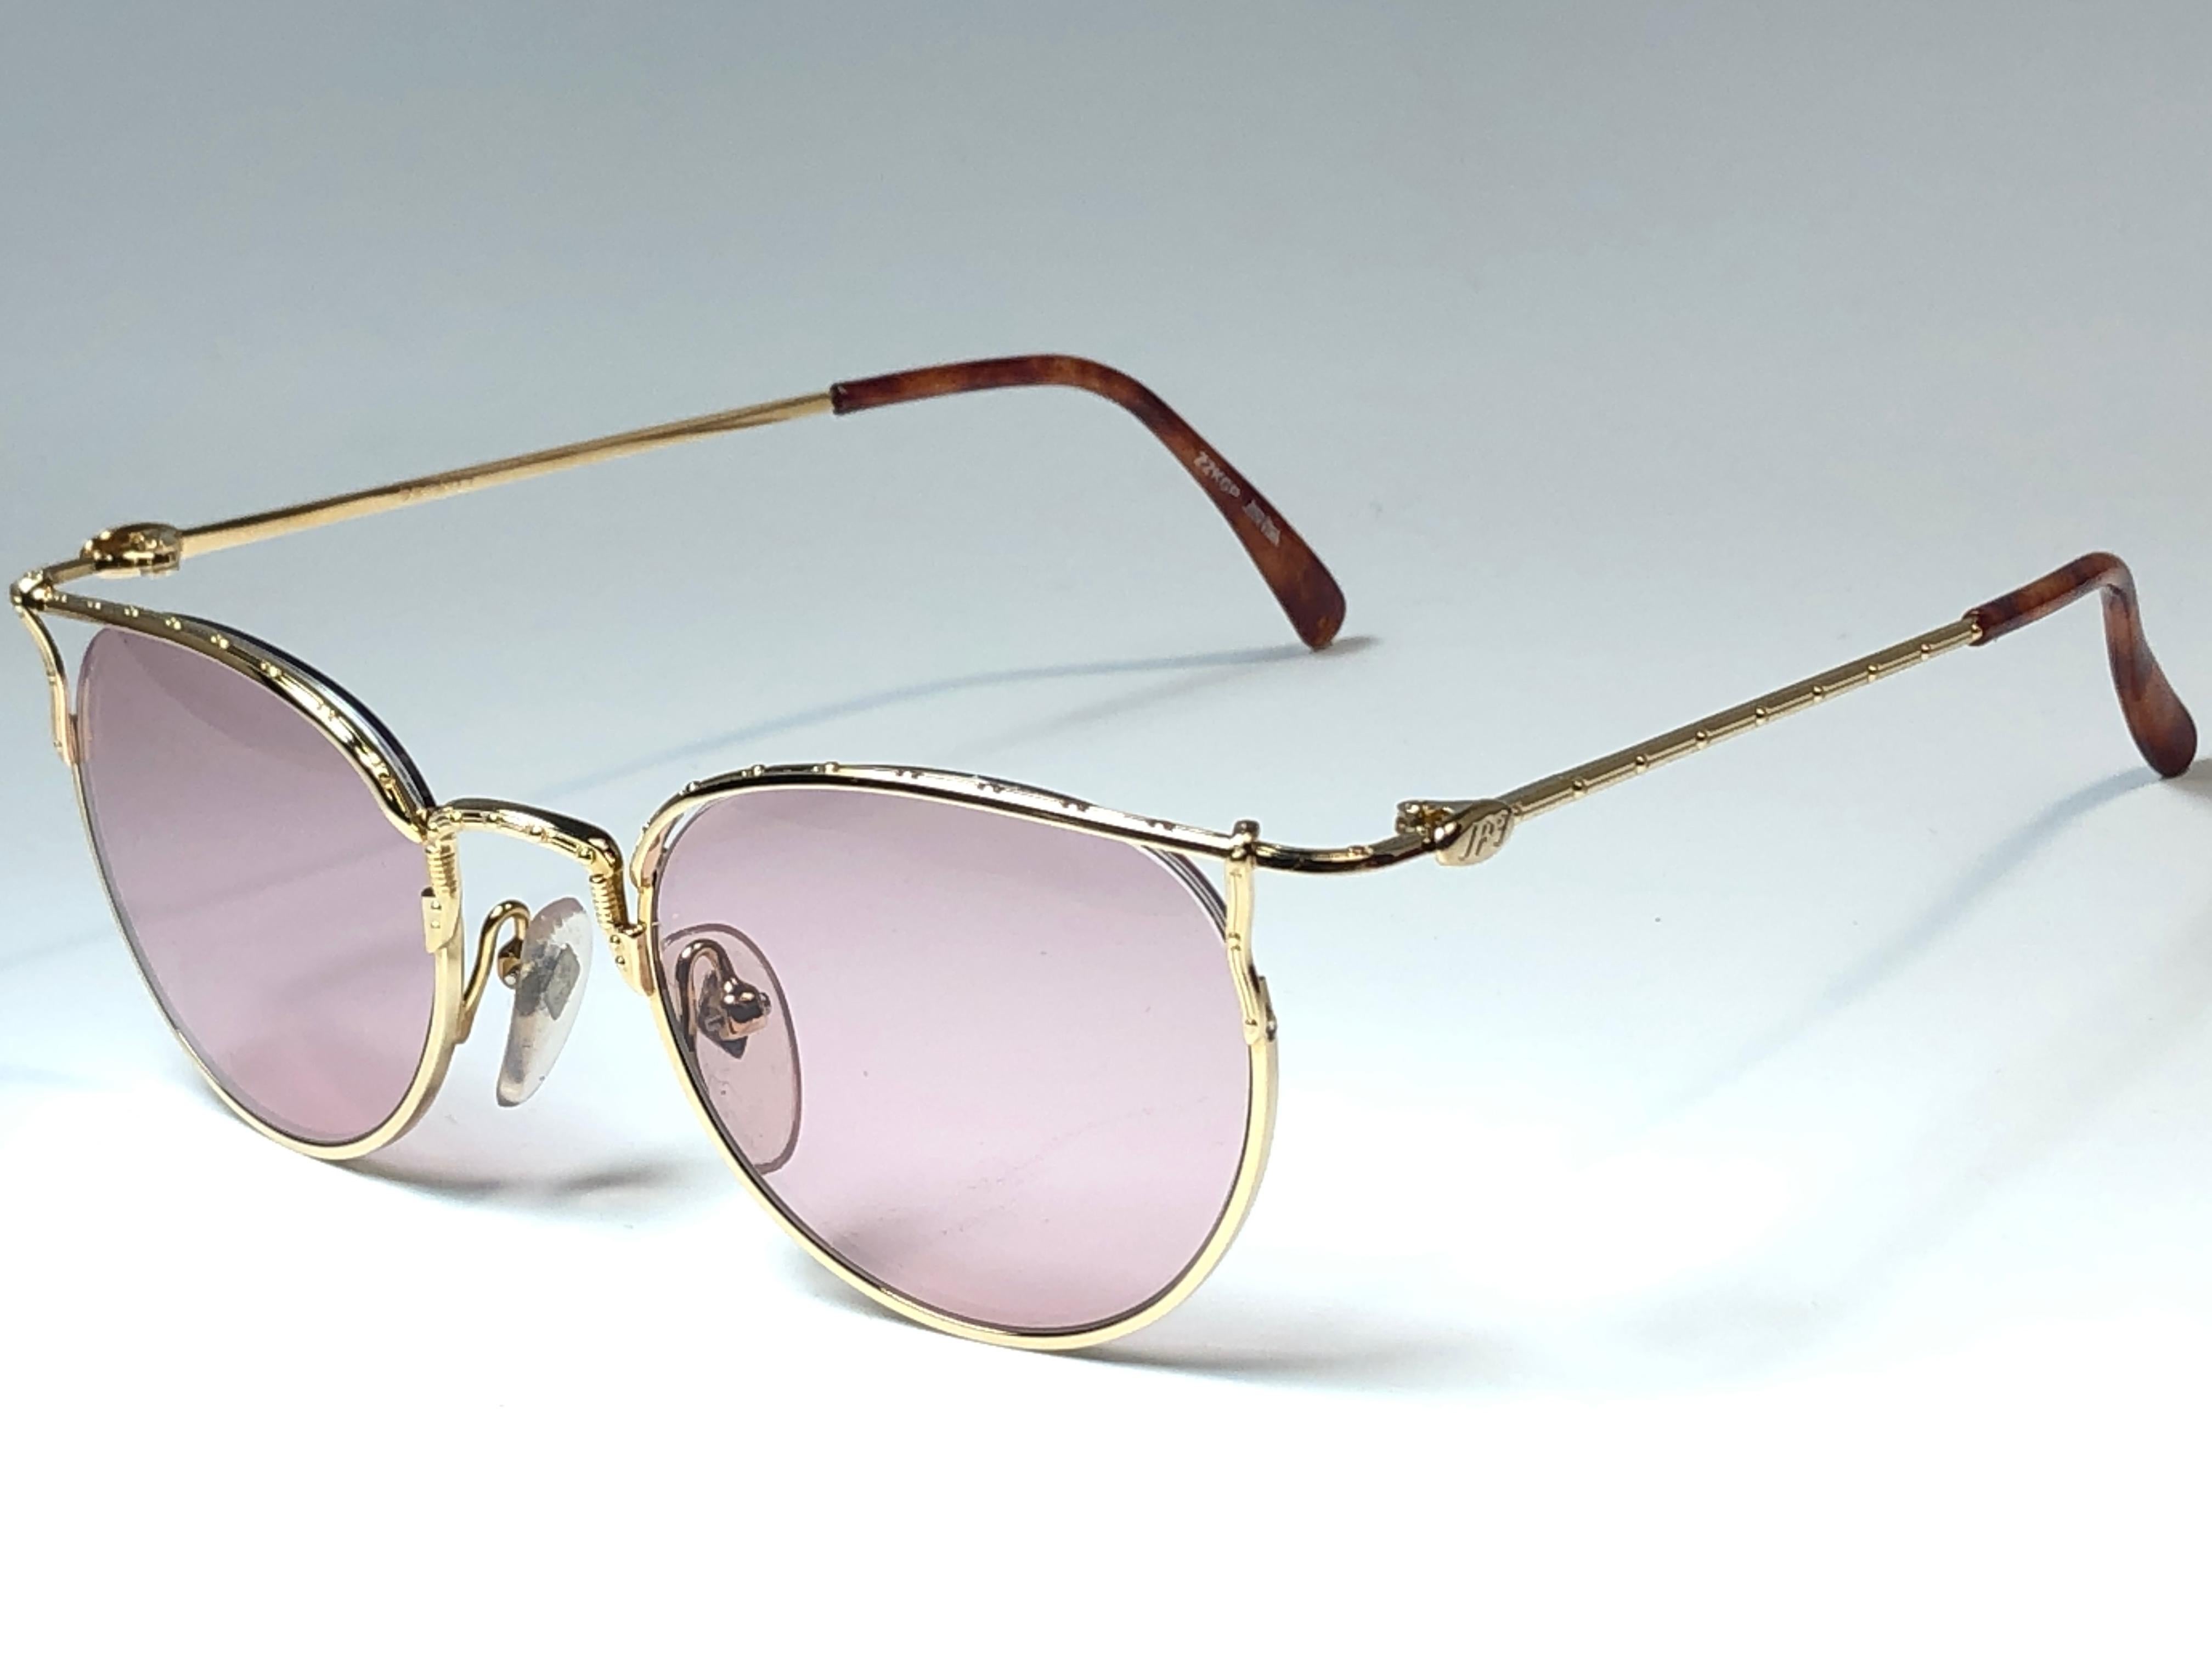 New Jean Paul Gaultier small oval 22K gold plated frame. 
Spotless light mauve lenses that complete a ready to wear JPG look.

Amazing design with strong yet intricate details.
Design and produced in the 1990's.
New, never worn or displayed.
A true